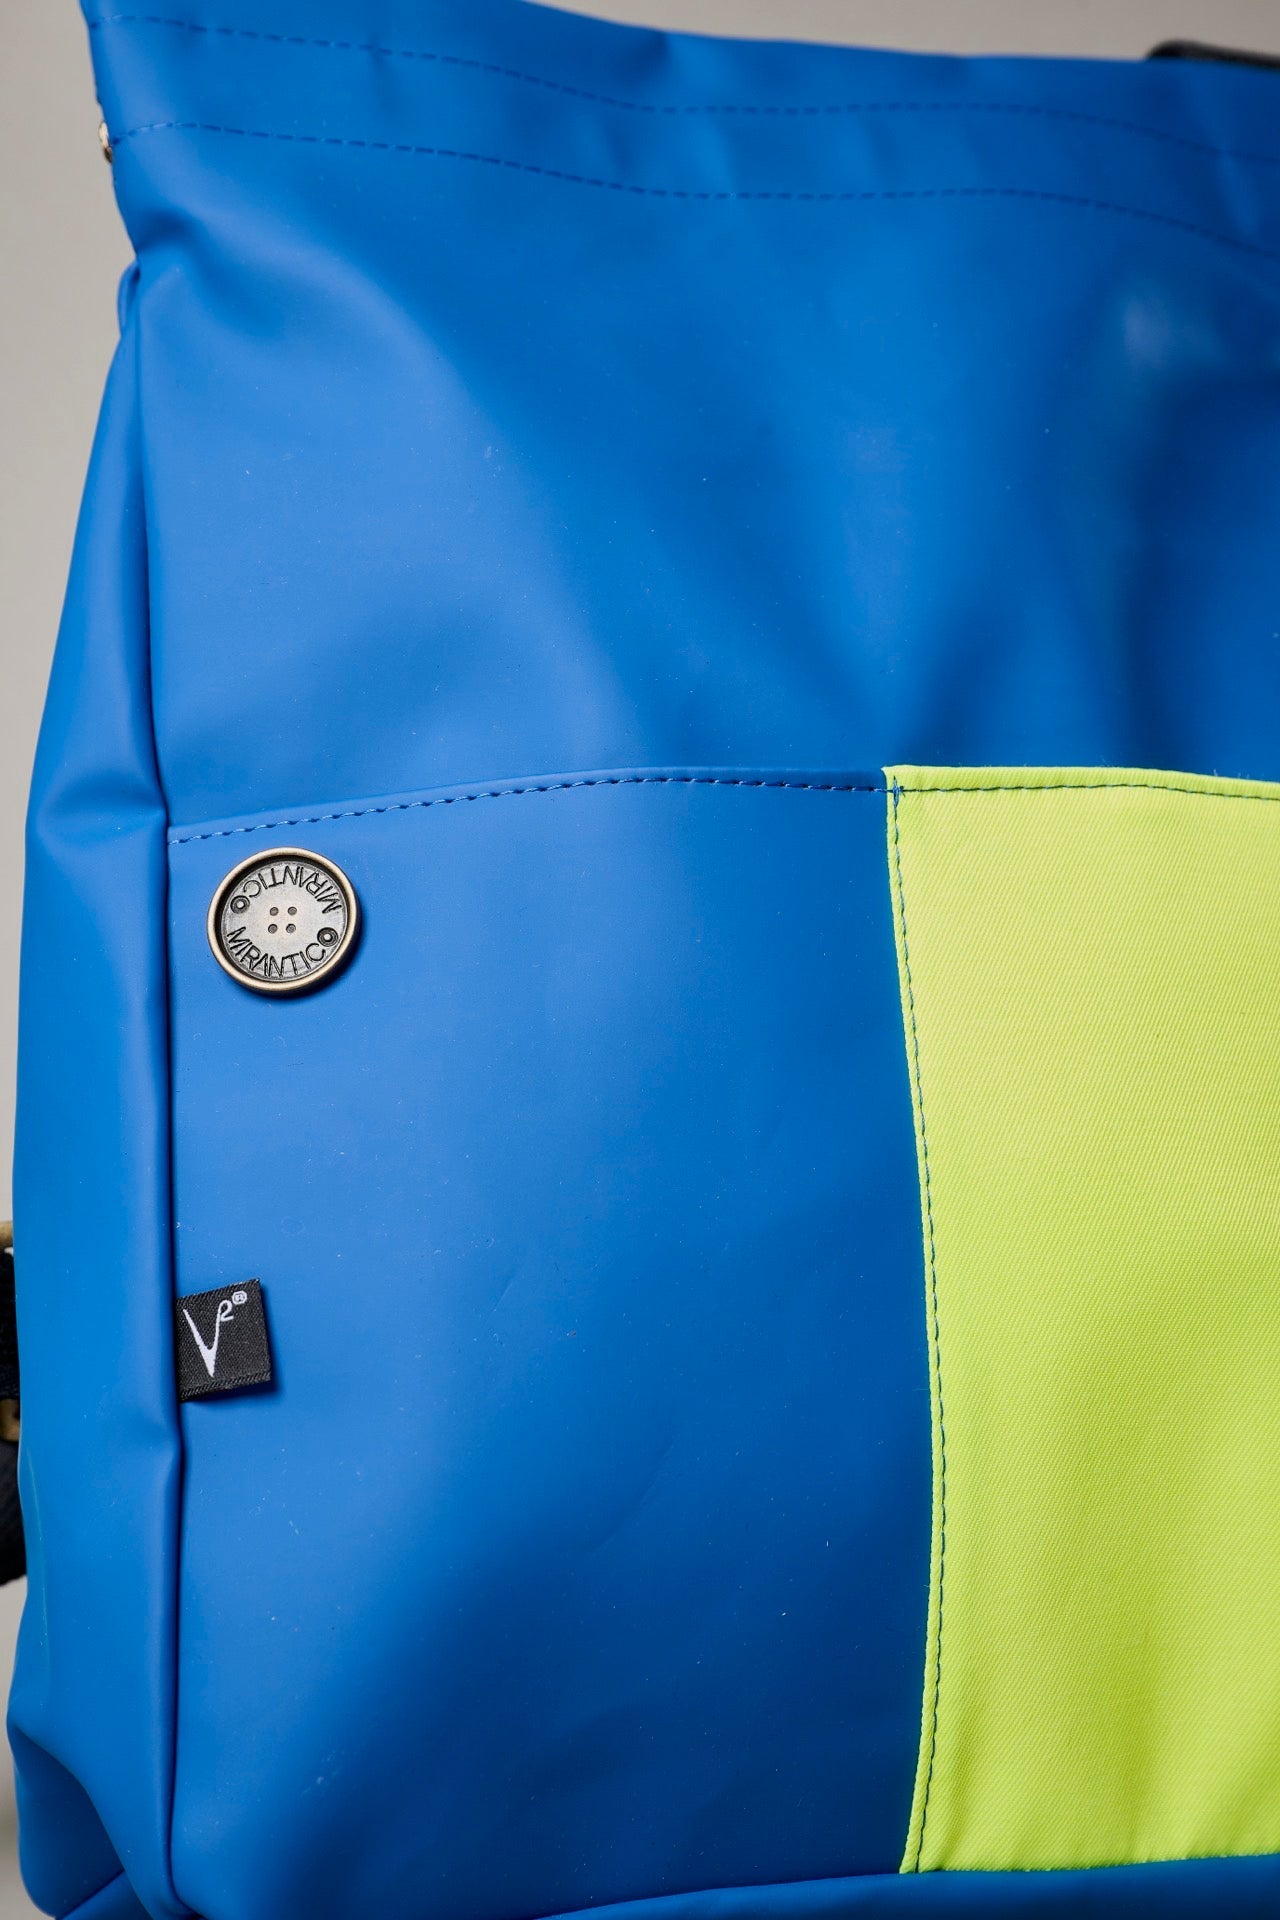 V2 x Mirantico - Royal Blue Memo Bag Backpack with Fluo Yellow Fabric Pocket